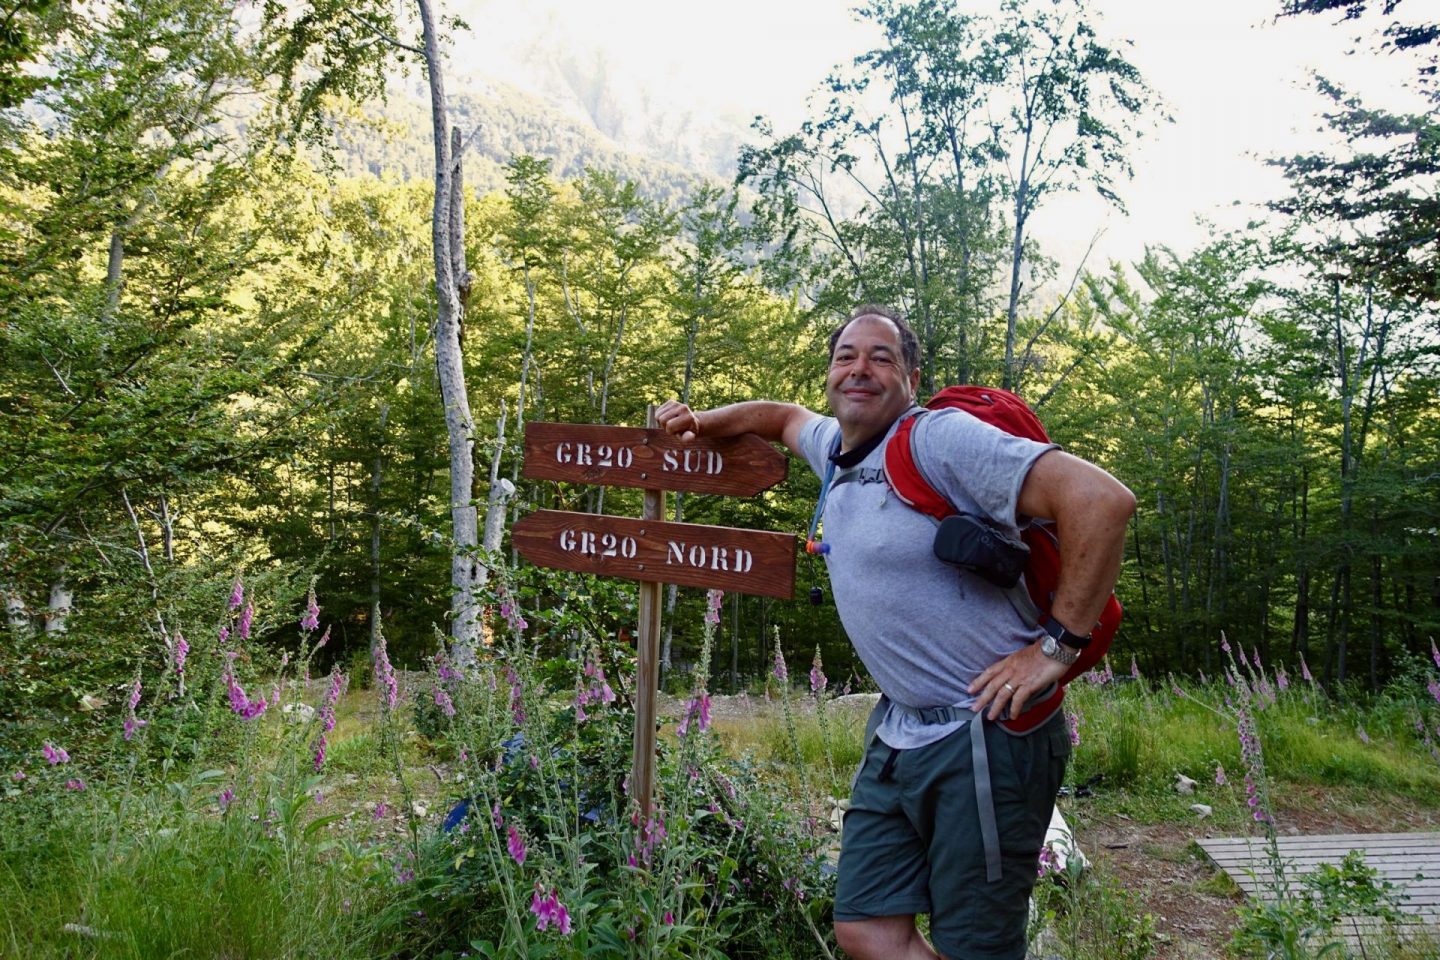 Nell's dad leaning against the half way sign, pointing to GR20 sud in one direction and GR20 Nord in the other. He's pulling a funny face and has one hand on his hip.